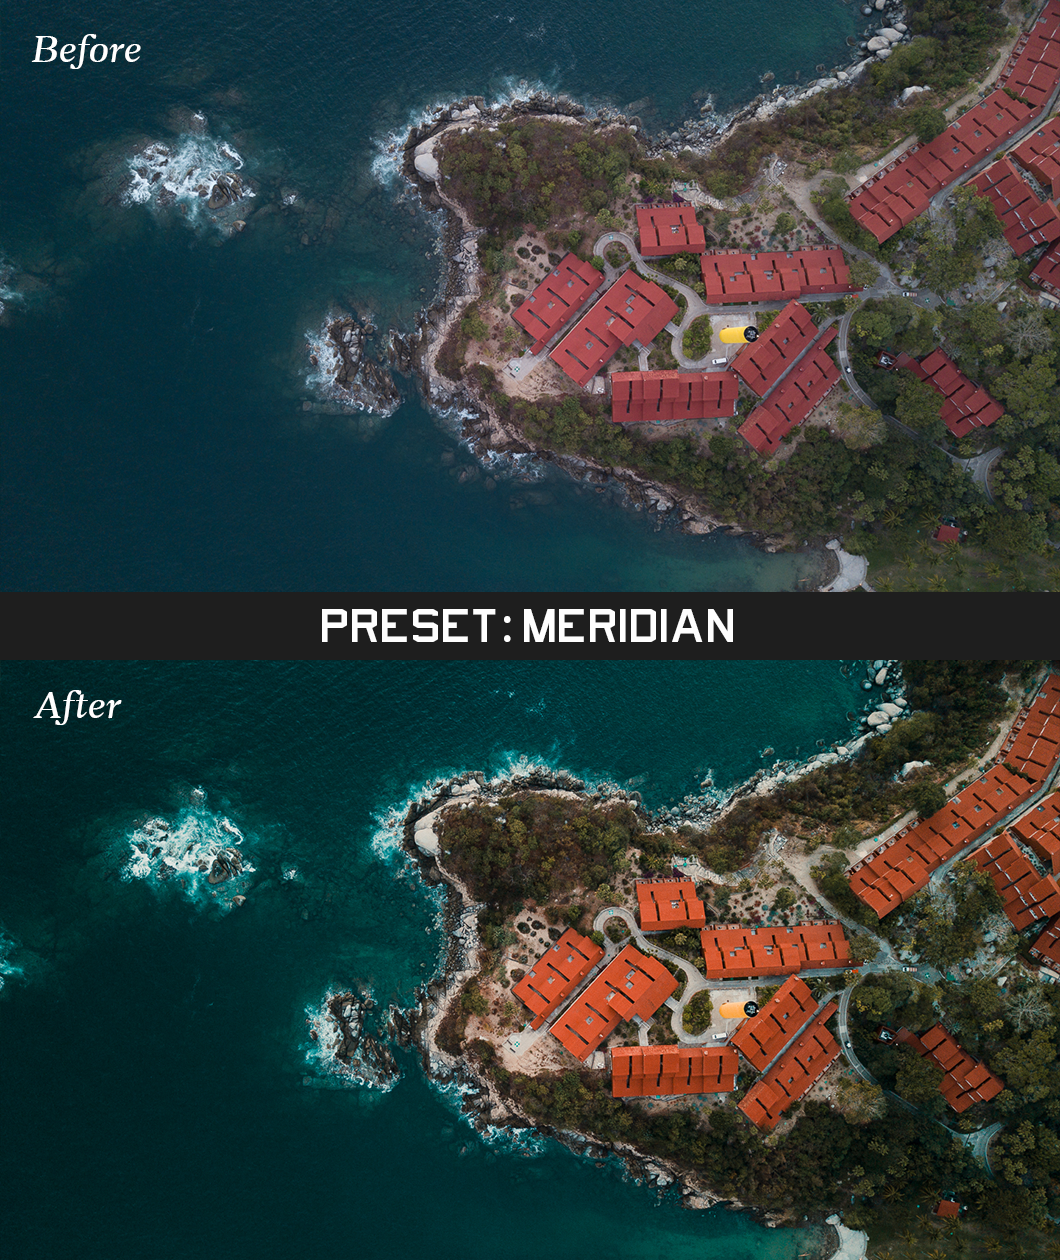 Two of the same photo of an aerial view of a coastal town. In between the photos is a grey bar that says "Preset: Meridian." The photo on the bottom says "After" and the colors are much brighter compared to the top photo - by Iz & Johnny Harris.